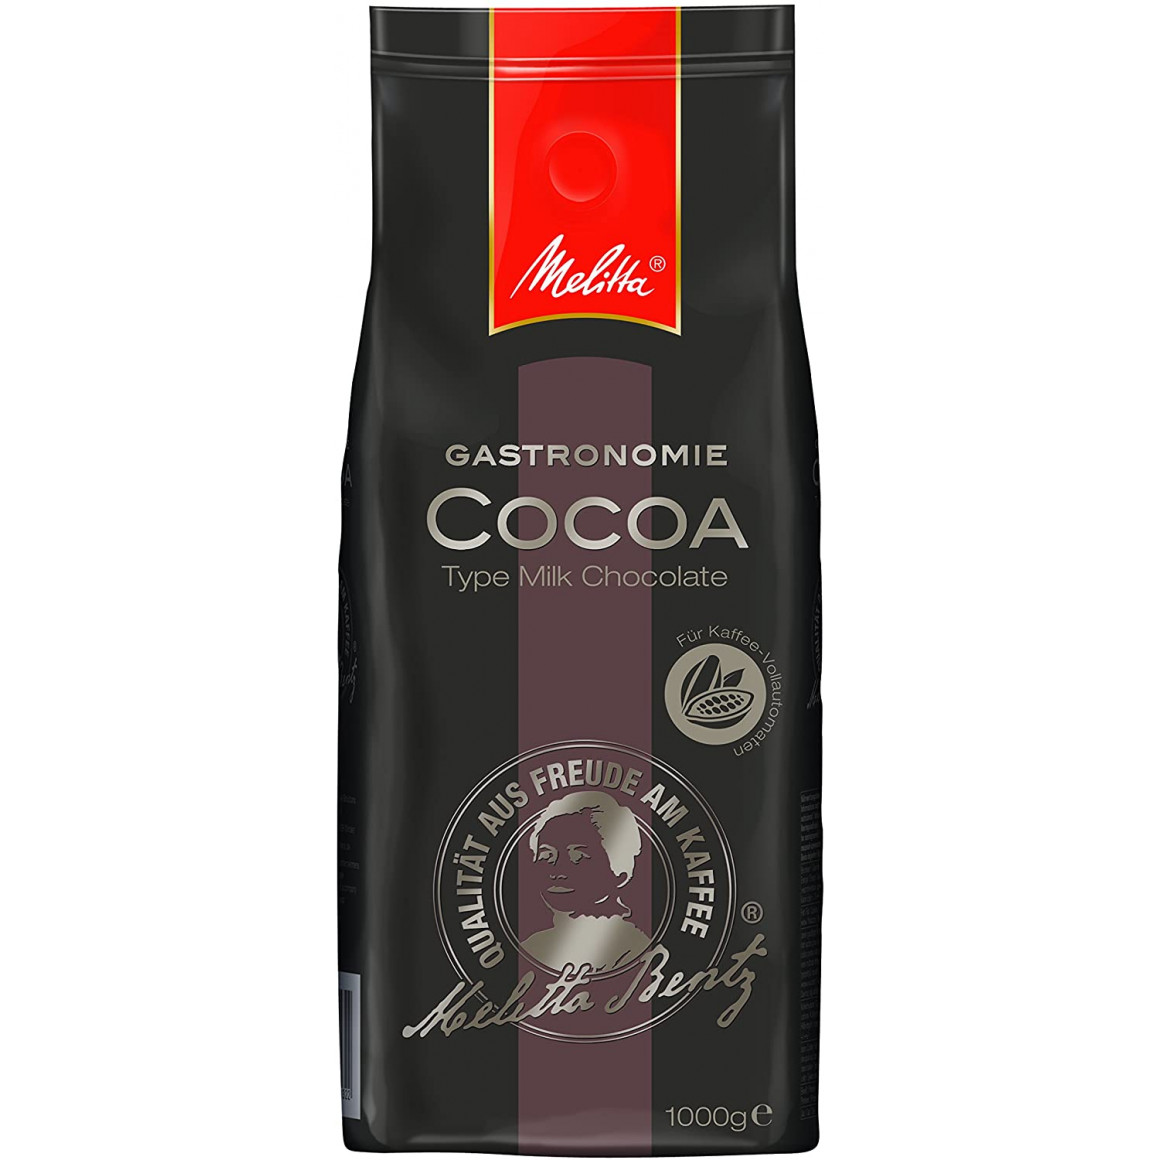 Gastronomy cacao 1000g